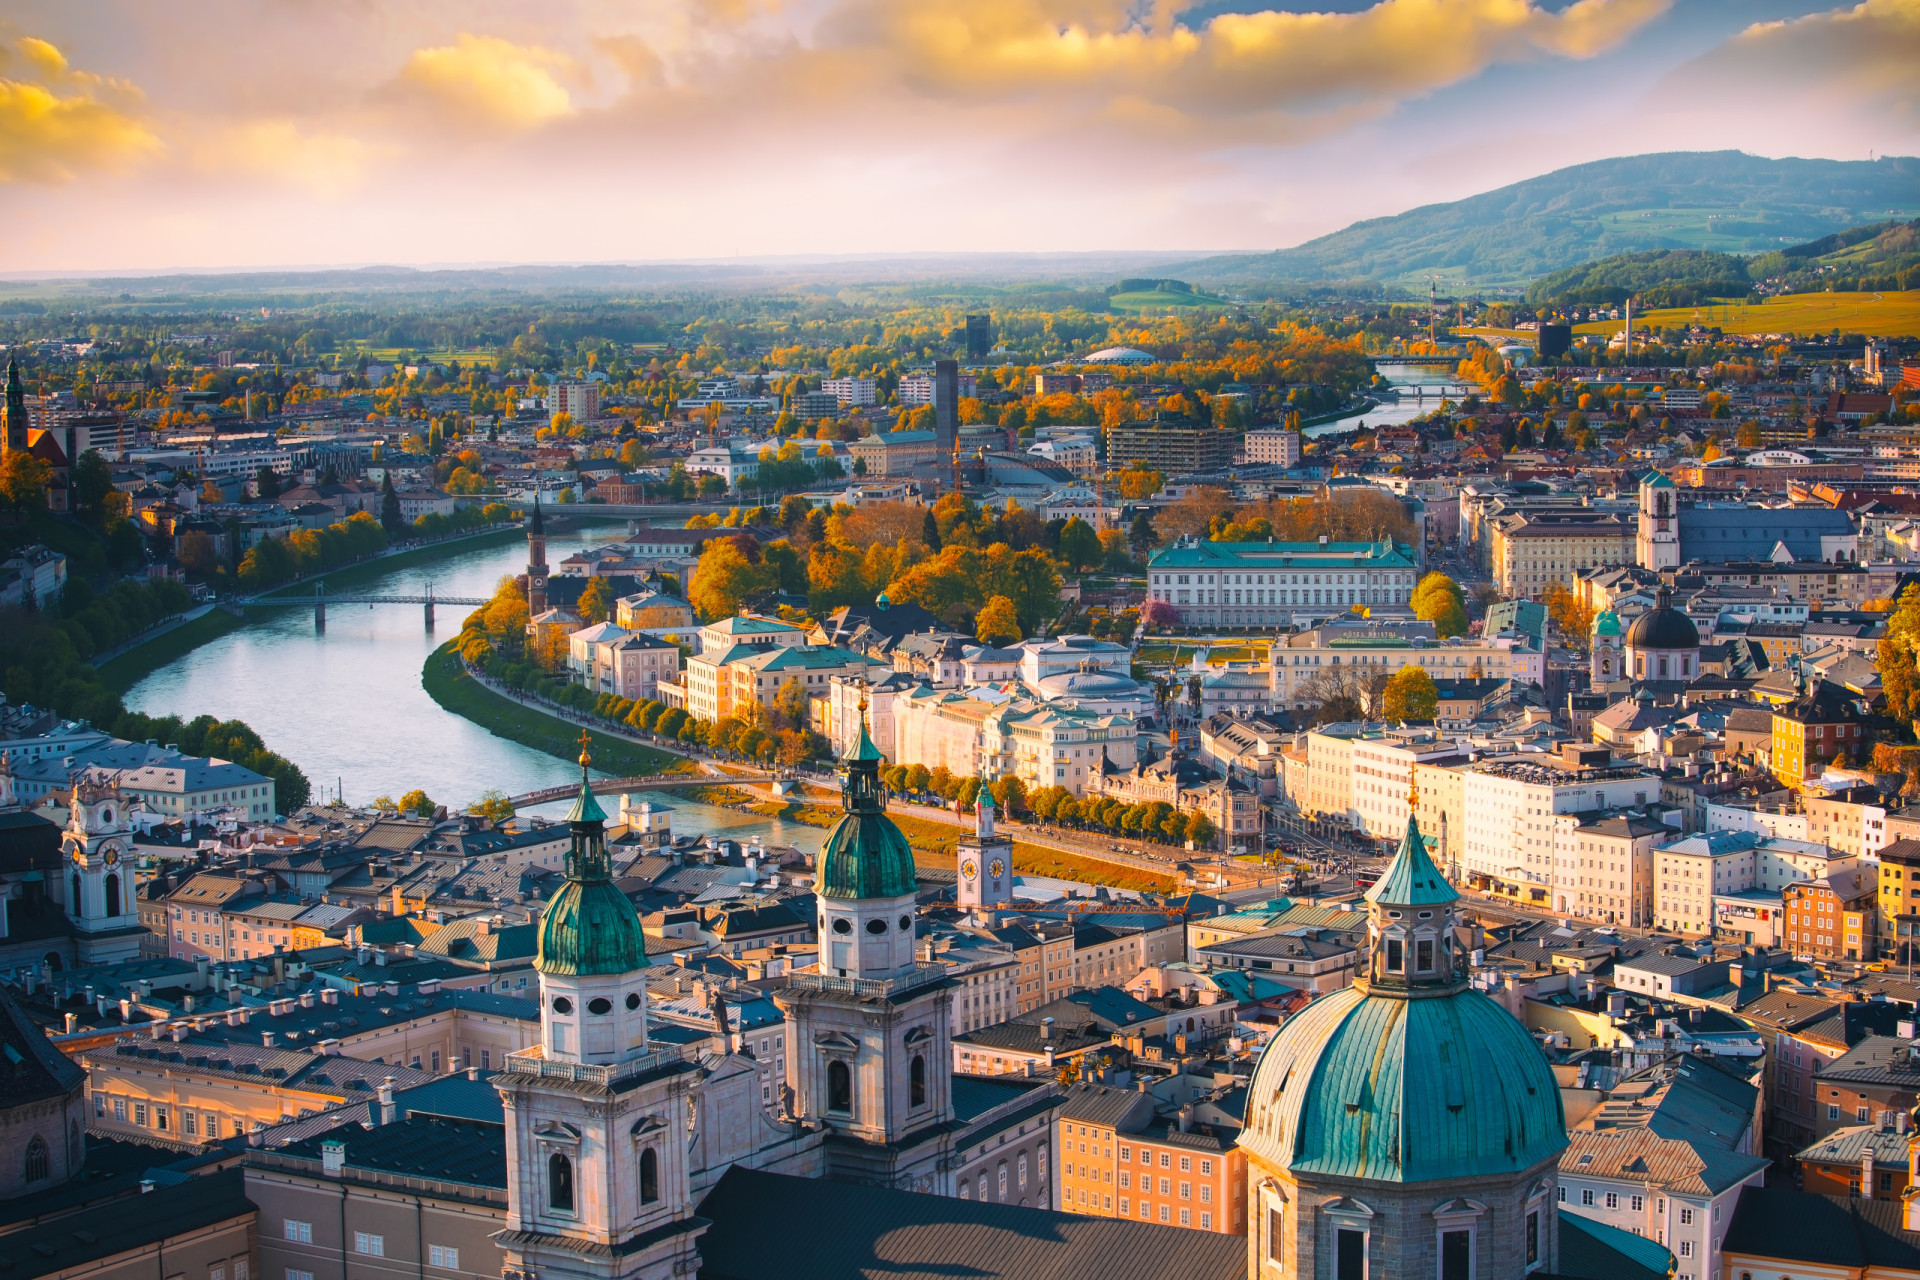 <p>Austria charges visitors a nightly accommodation tax, which differs depending on the province. In Vienna and Salzburg, around 3.2% is added onto your accommodation bill.</p><p><a href="https://www.msn.com/en-ph/community/channel/vid-7xx8mnucu55yw63we9va2gwr7uihbxwc68fxqp25x6tg4ftibpra?cvid=94631541bc0f4f89bfd59158d696ad7e">Follow us and access great exclusive content every day</a></p>